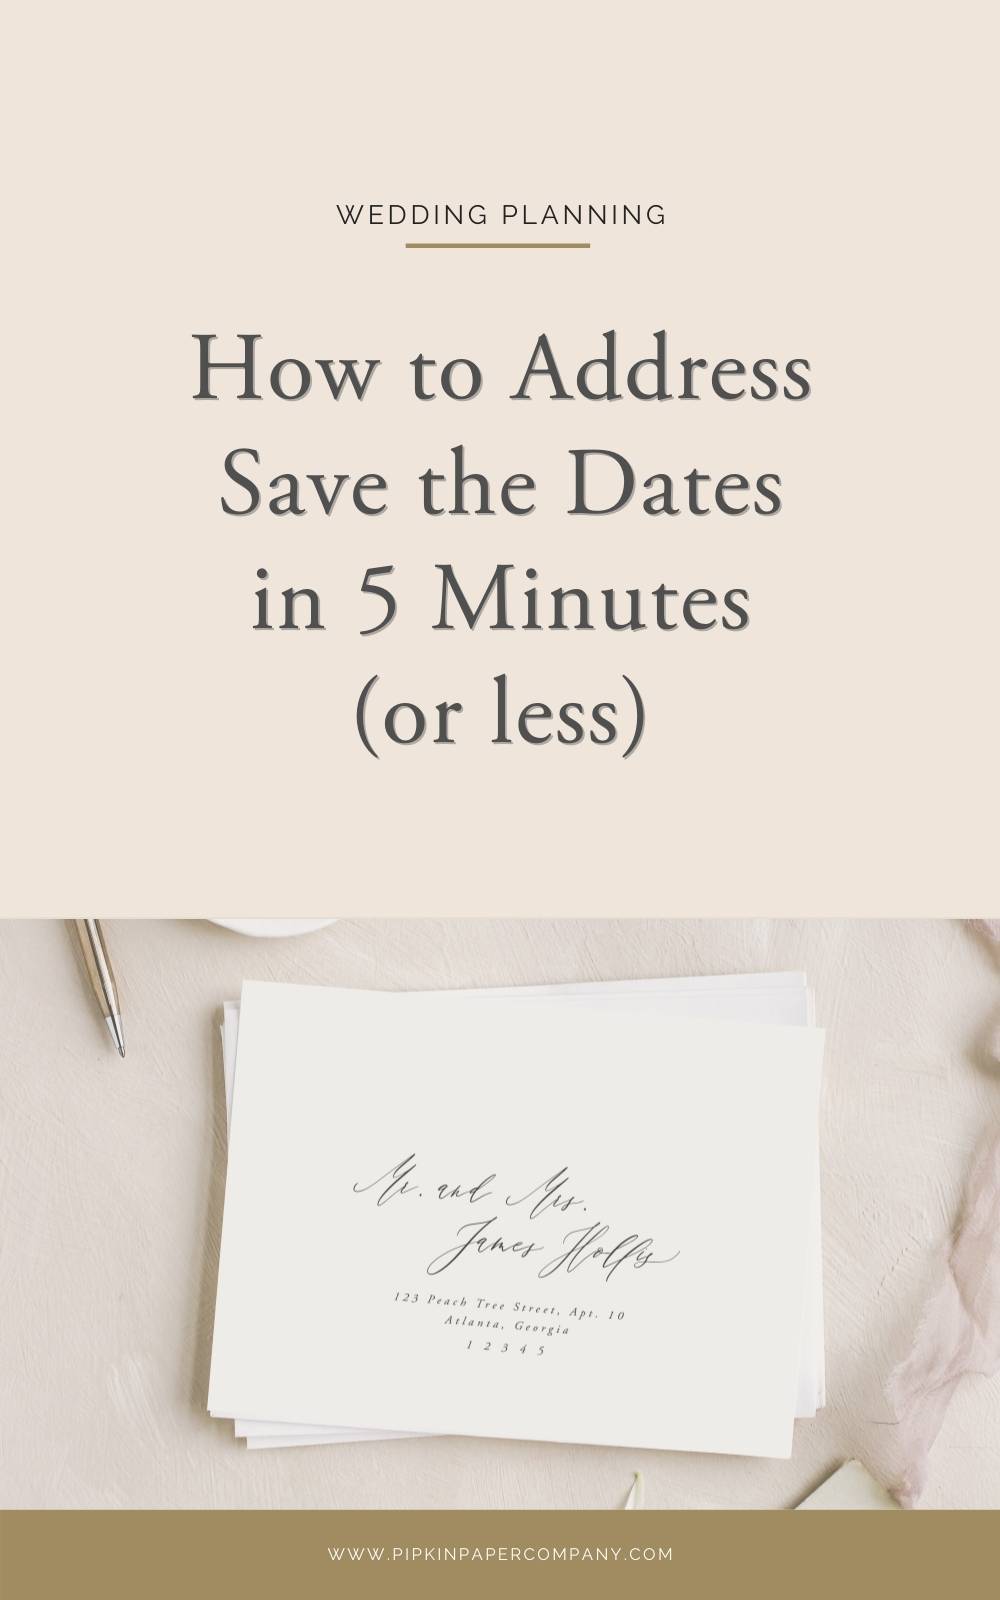 How to Address Save the Dates Pipkin Paper Company